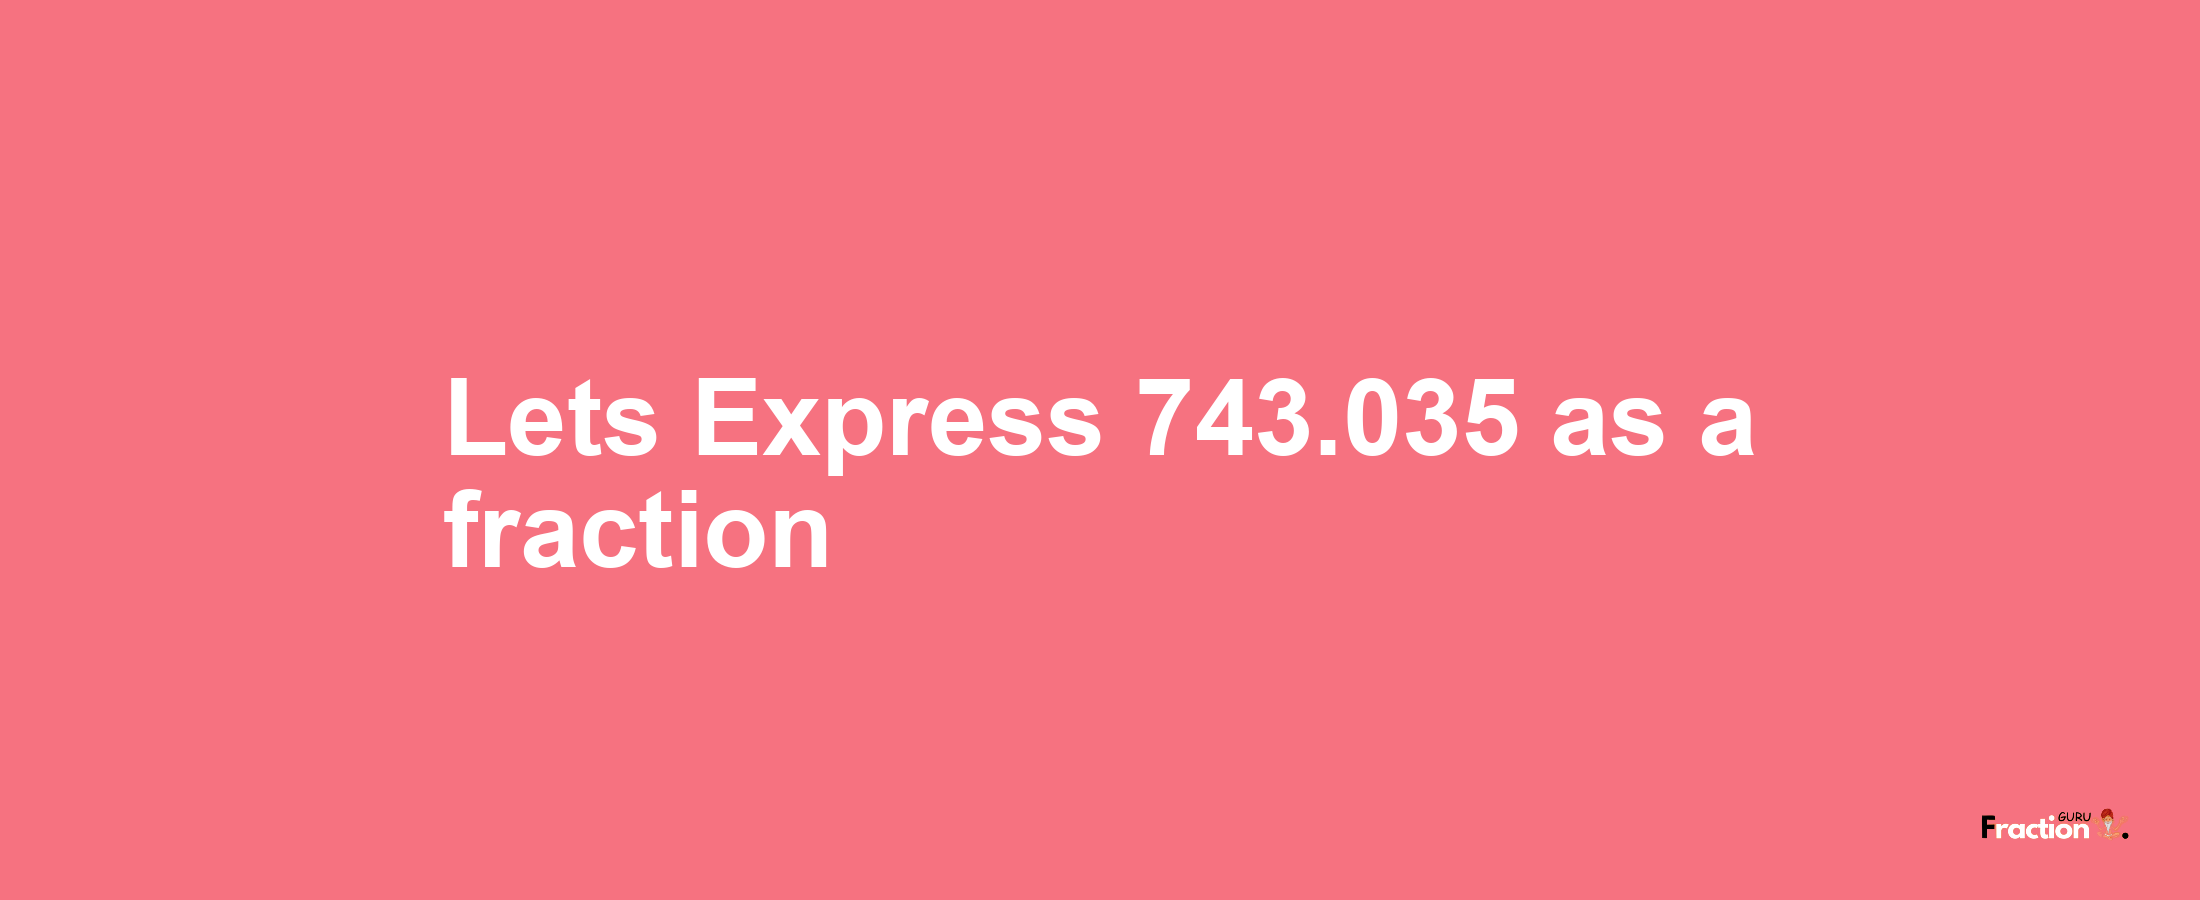 Lets Express 743.035 as afraction